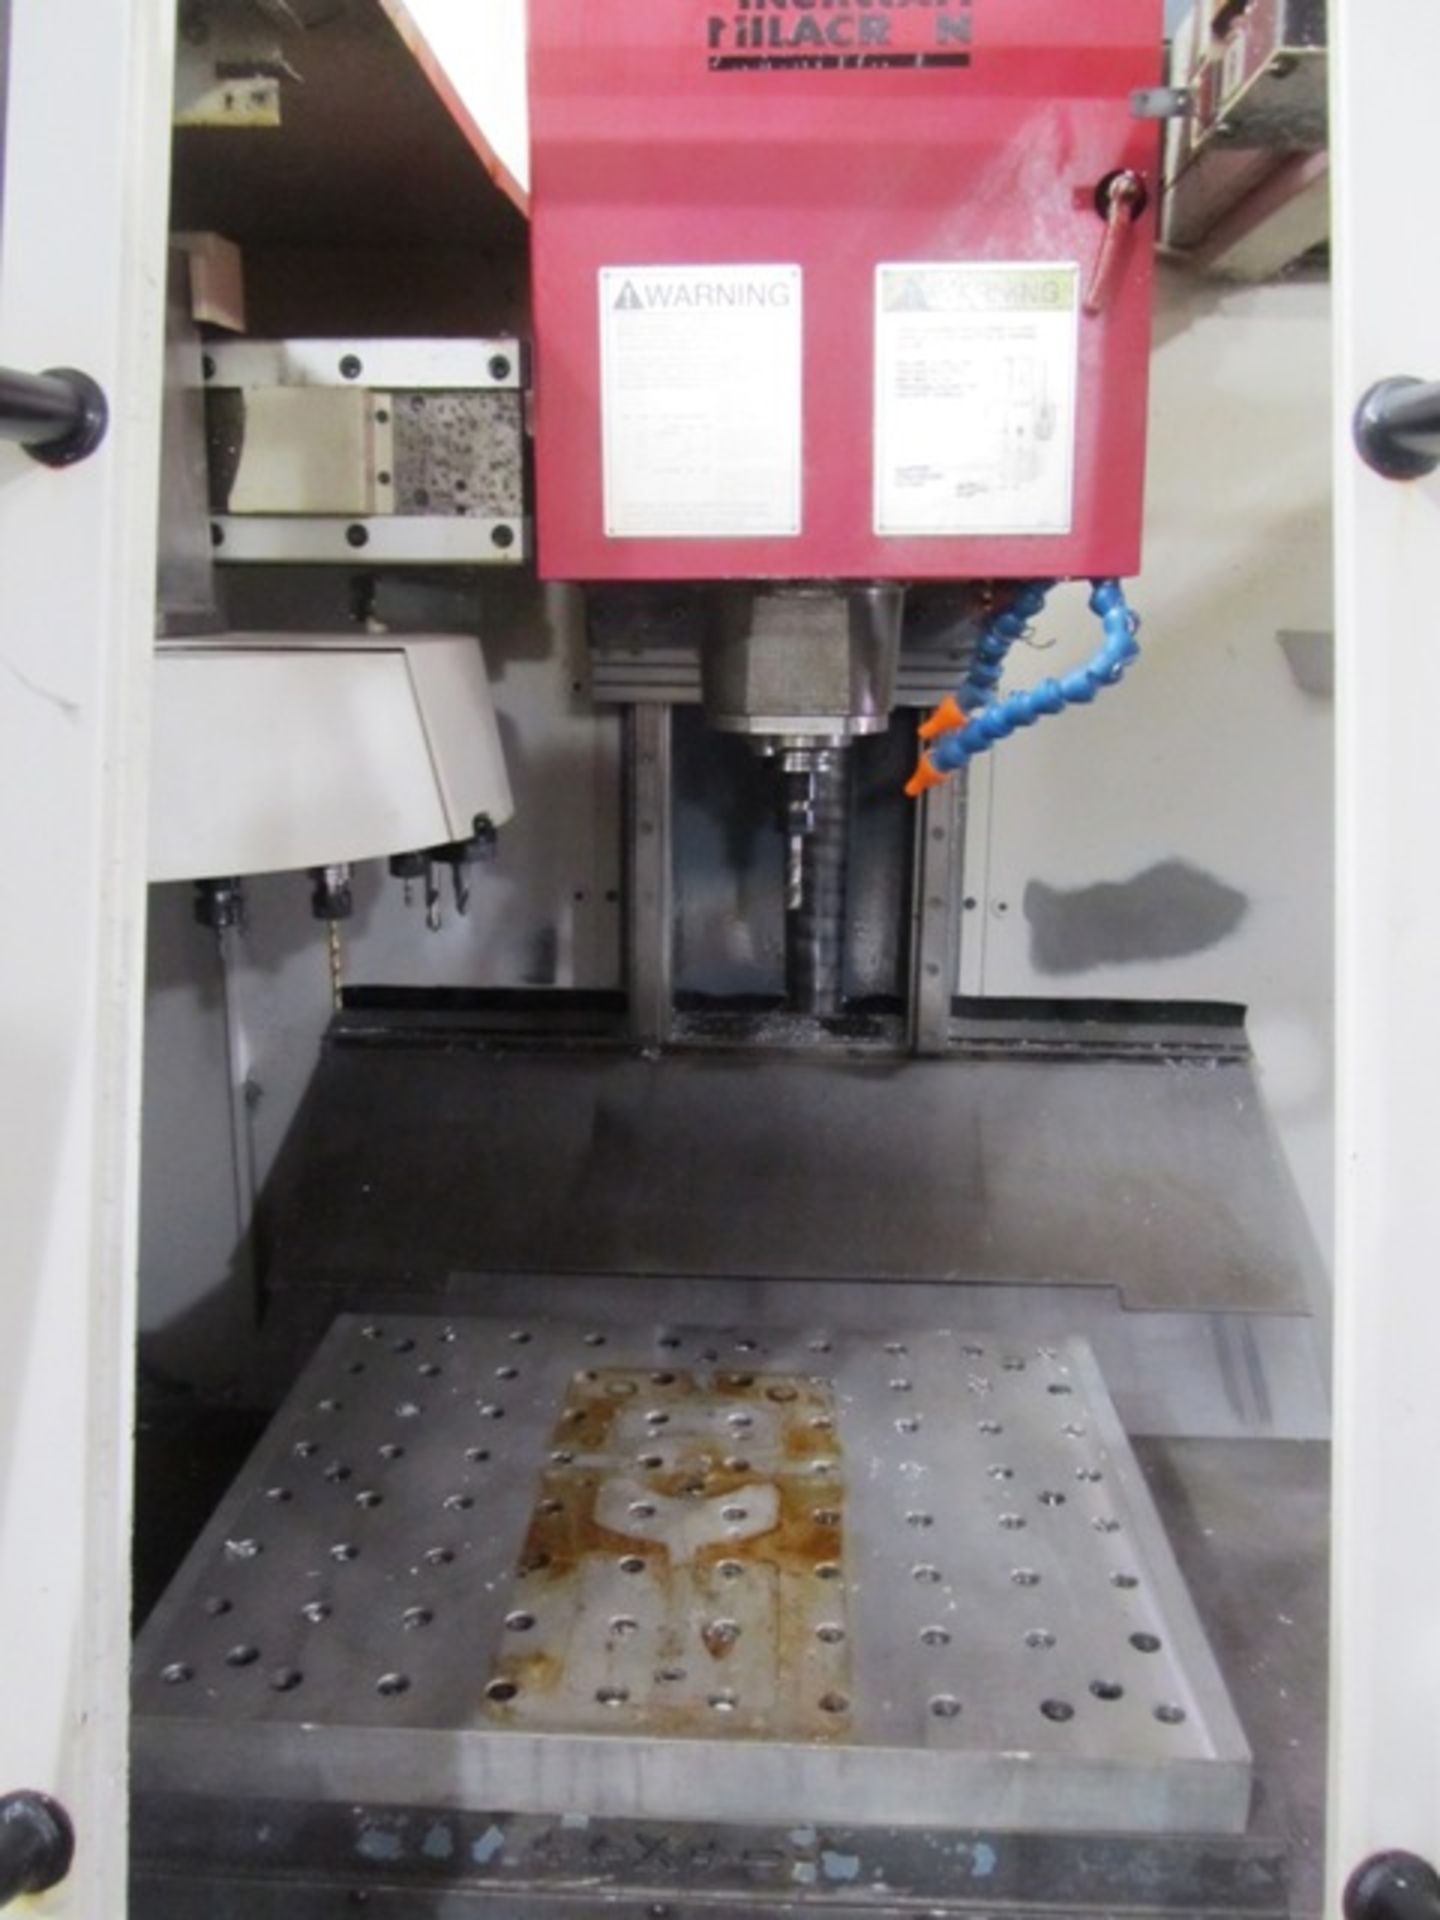 Cincinnati Milacron Arrow 500 Vertical Machining Center with 20.5'' x 27.5'' Table, 40 Taper Spindle - Image 4 of 6